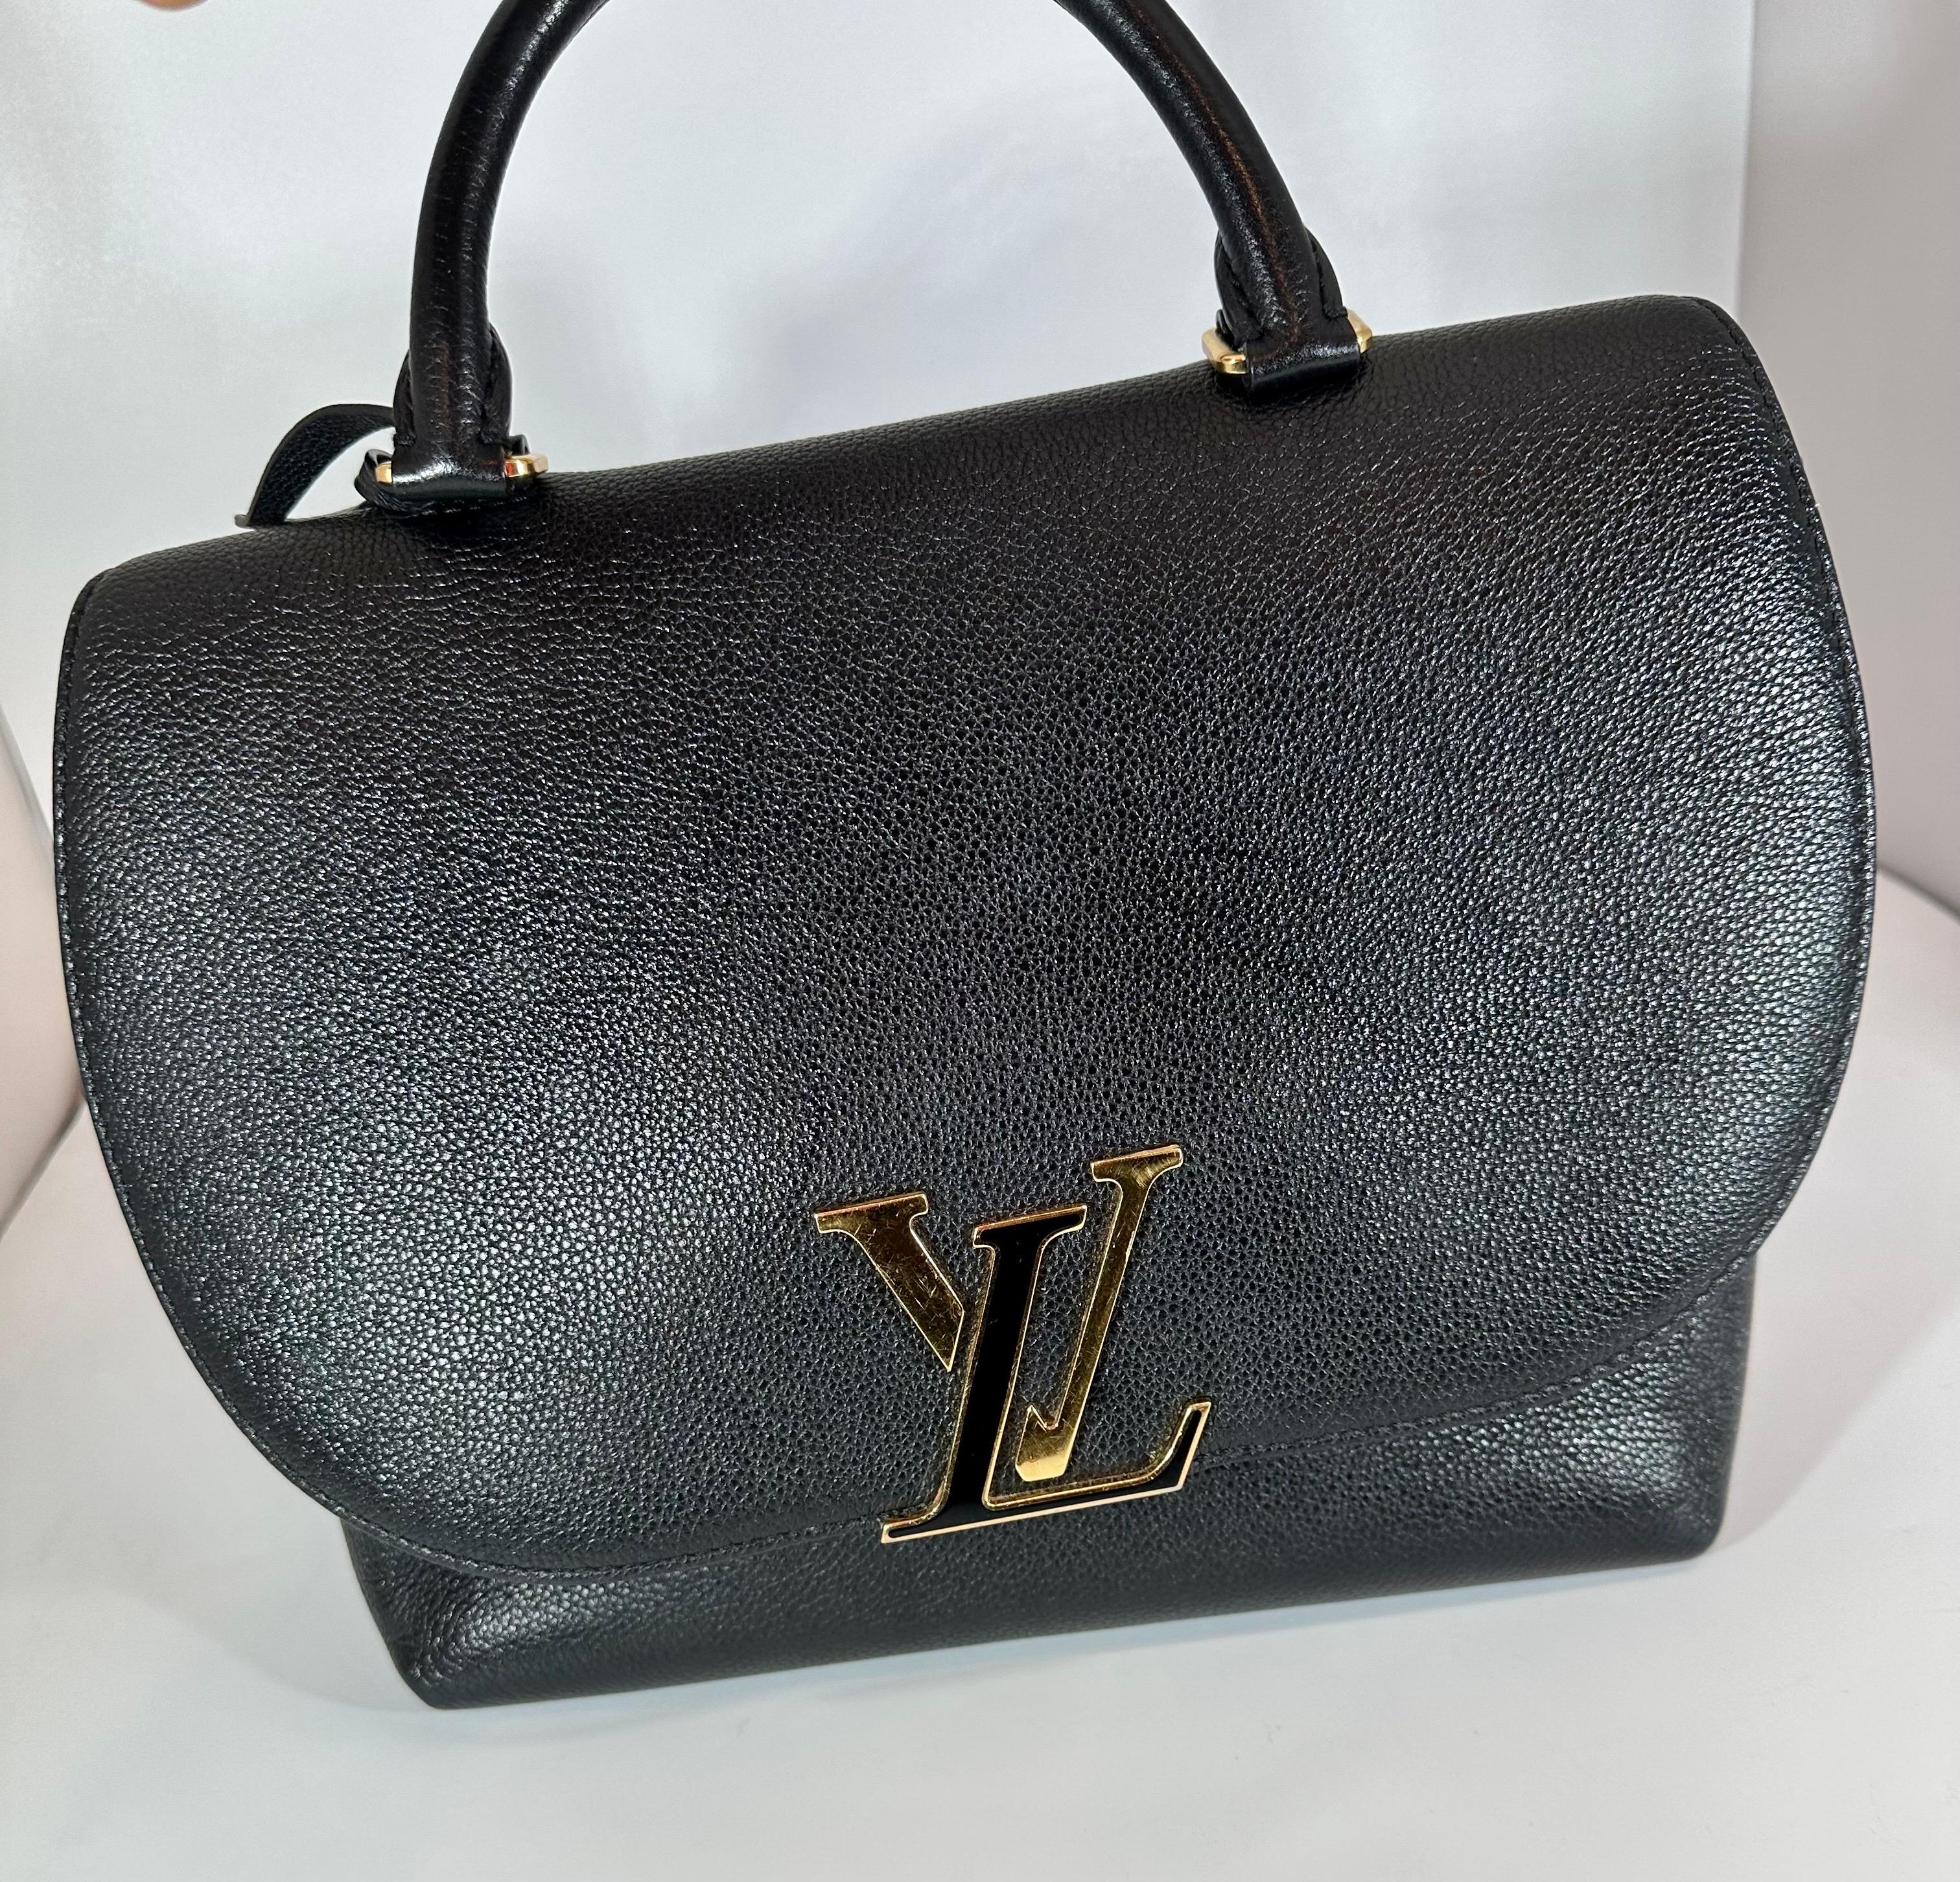 LOUIS VUITTON Black Taurillon Leather Volta Bag/ Hand bag, Excellent condition In Excellent Condition For Sale In New York, NY